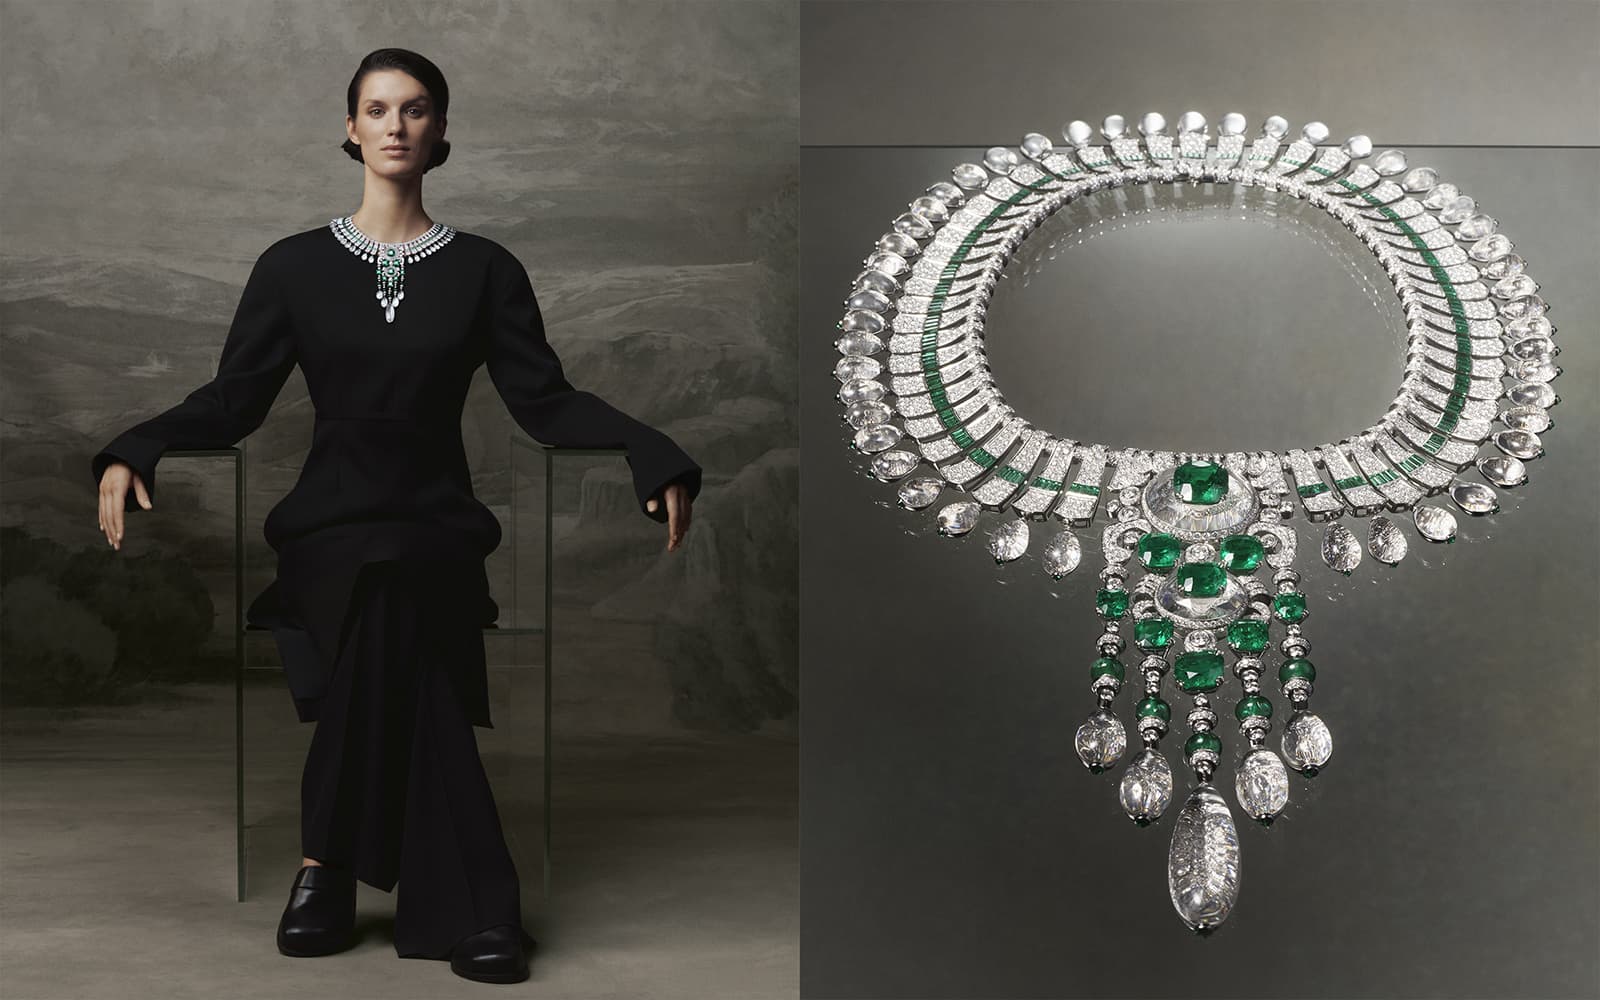 Boucheron New Maharajah Necklace set with nine Colombian cushion-cut emeralds for a total of 38.73 carats, diamonds, rock crystal and emeralds in platinum and white gold from the Histoire de Style New Maharajahs High Jewellery Collection